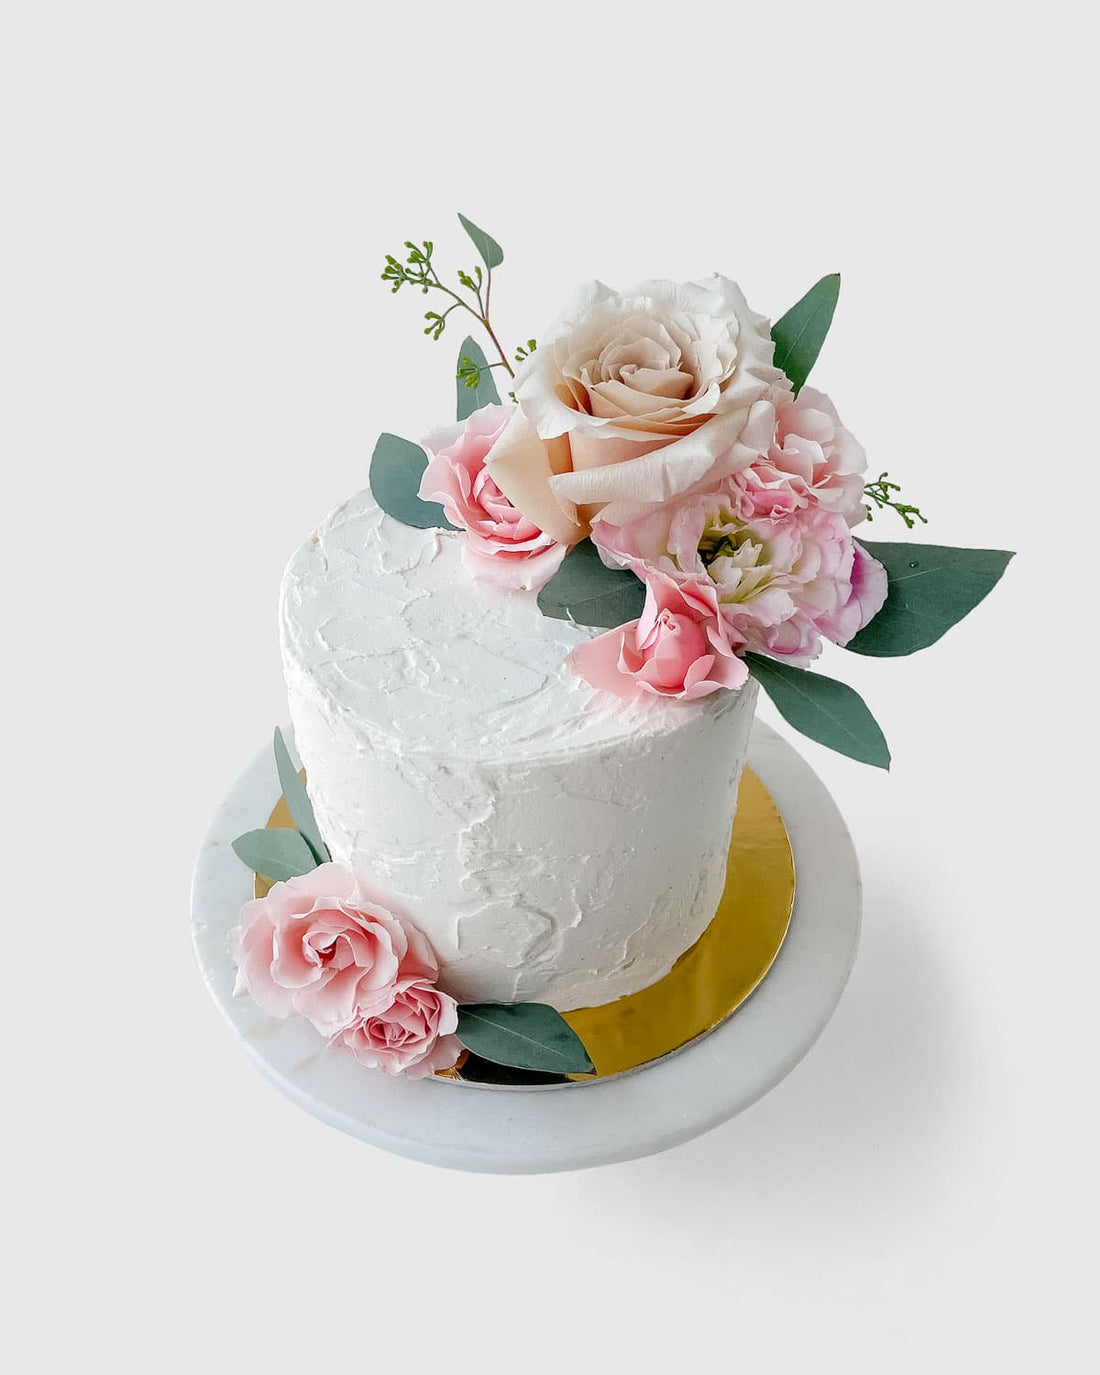 Fresh Flower Cake Decoration | Latest Floral Decor Design Ideas And Trends  For Events